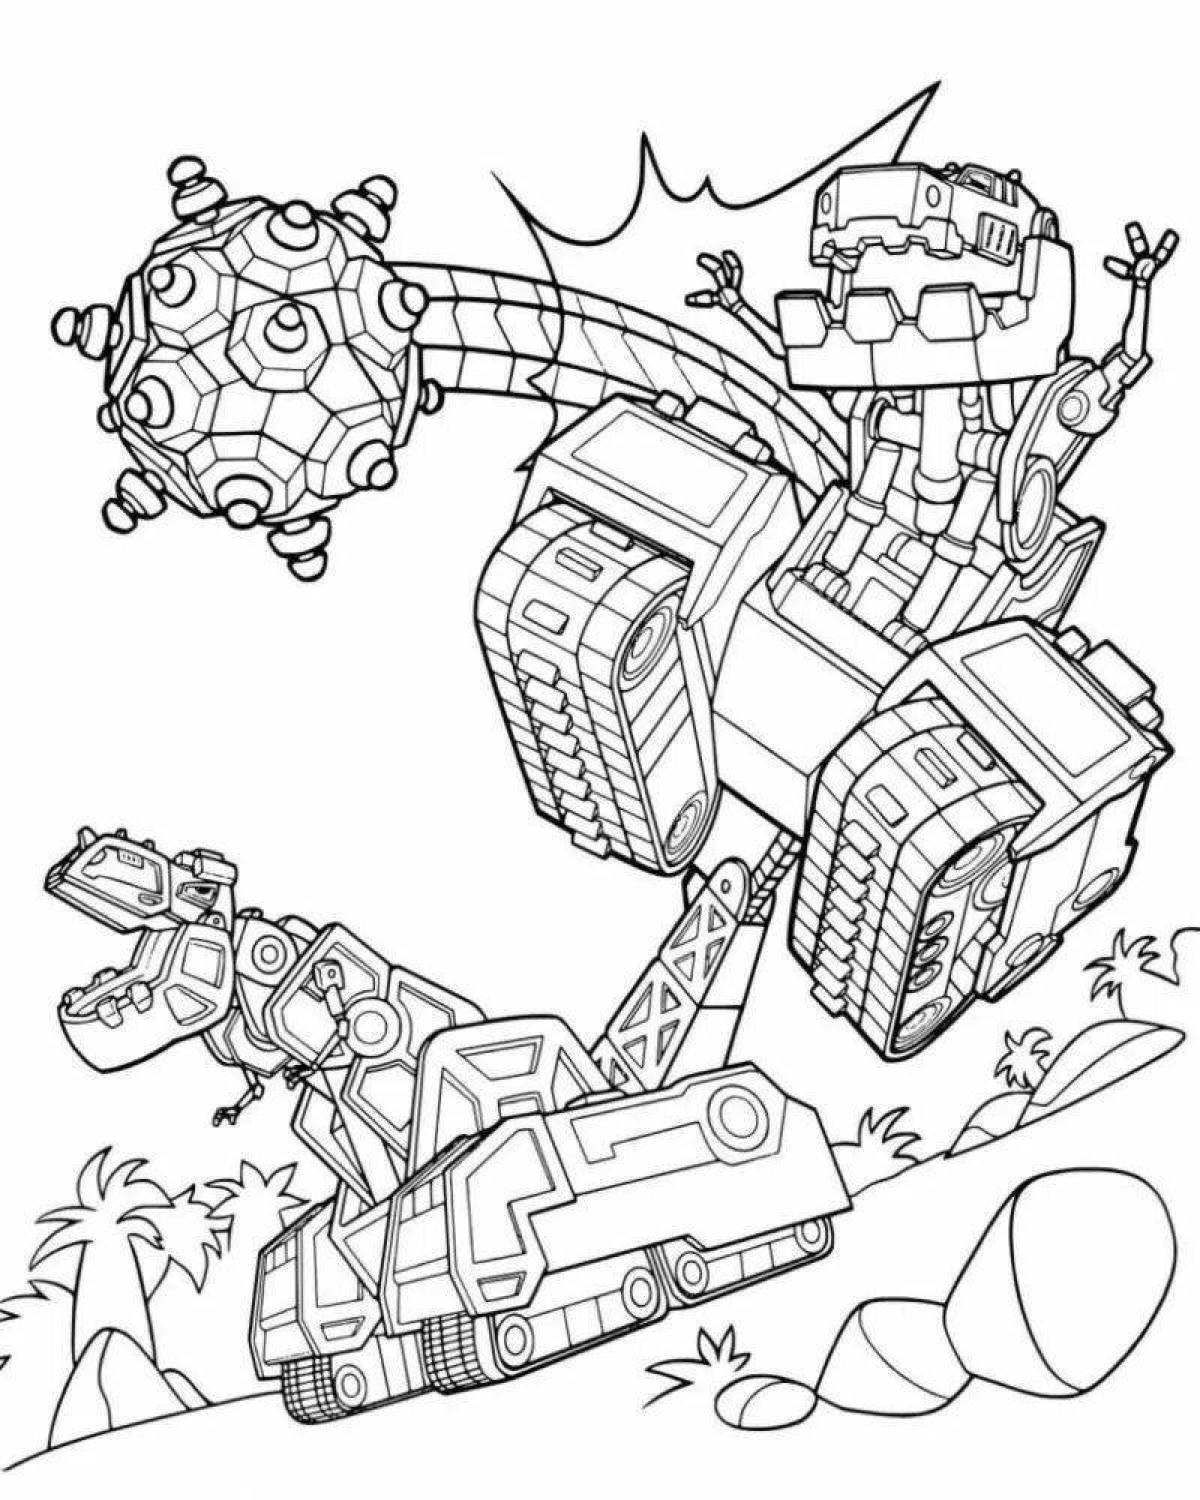 Exquisite caterpillar robot coloring page